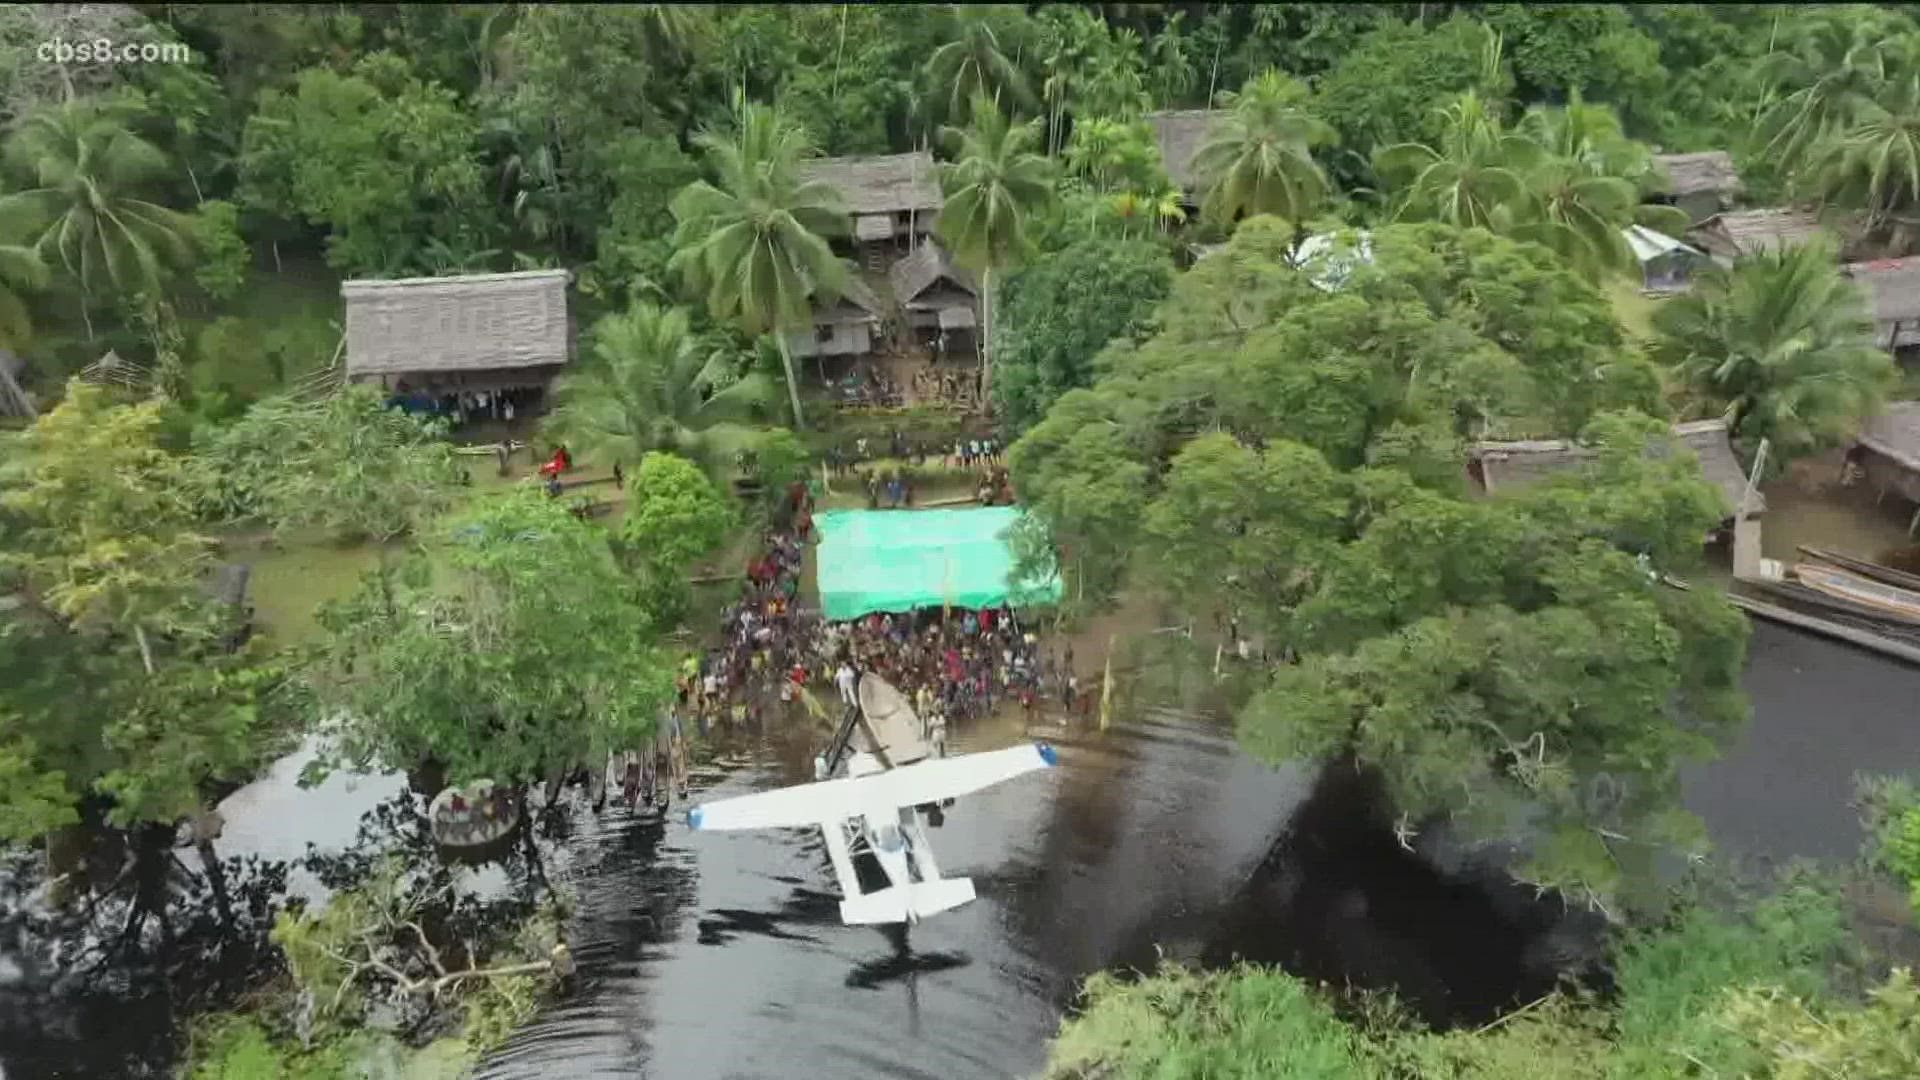 Samaritan Aviation helps villagers in Papua New Guinea with life flights, medicine, food and clothing.